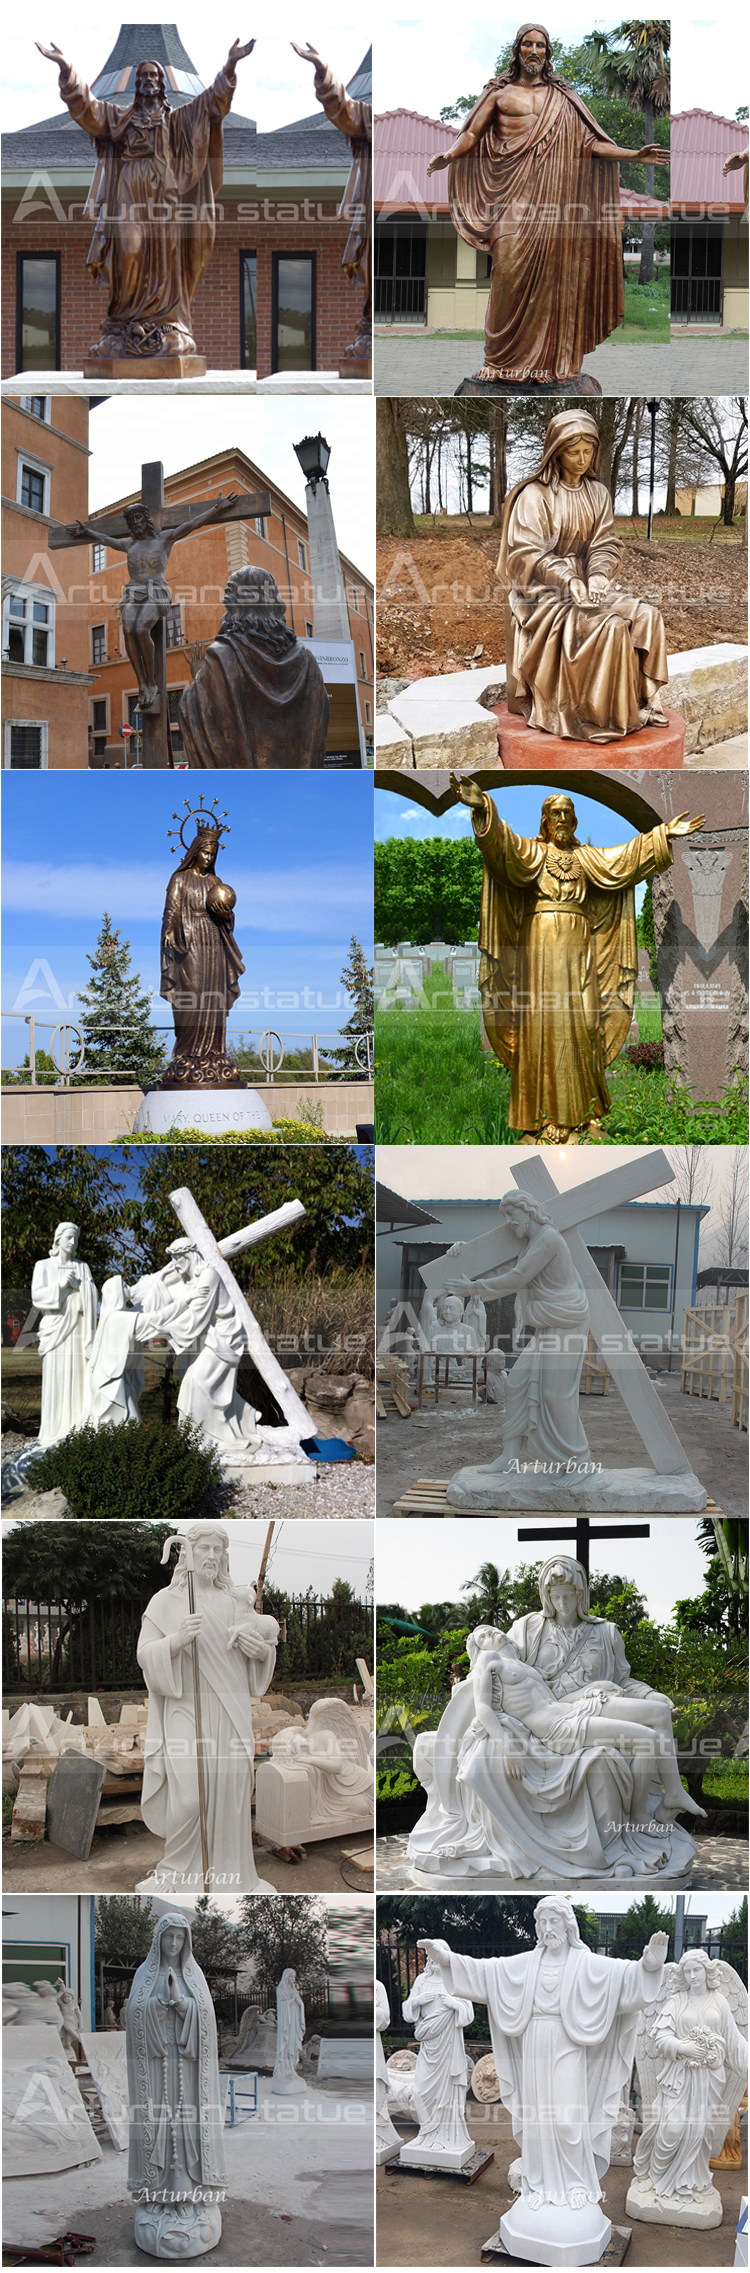 christian jesus and mary statues